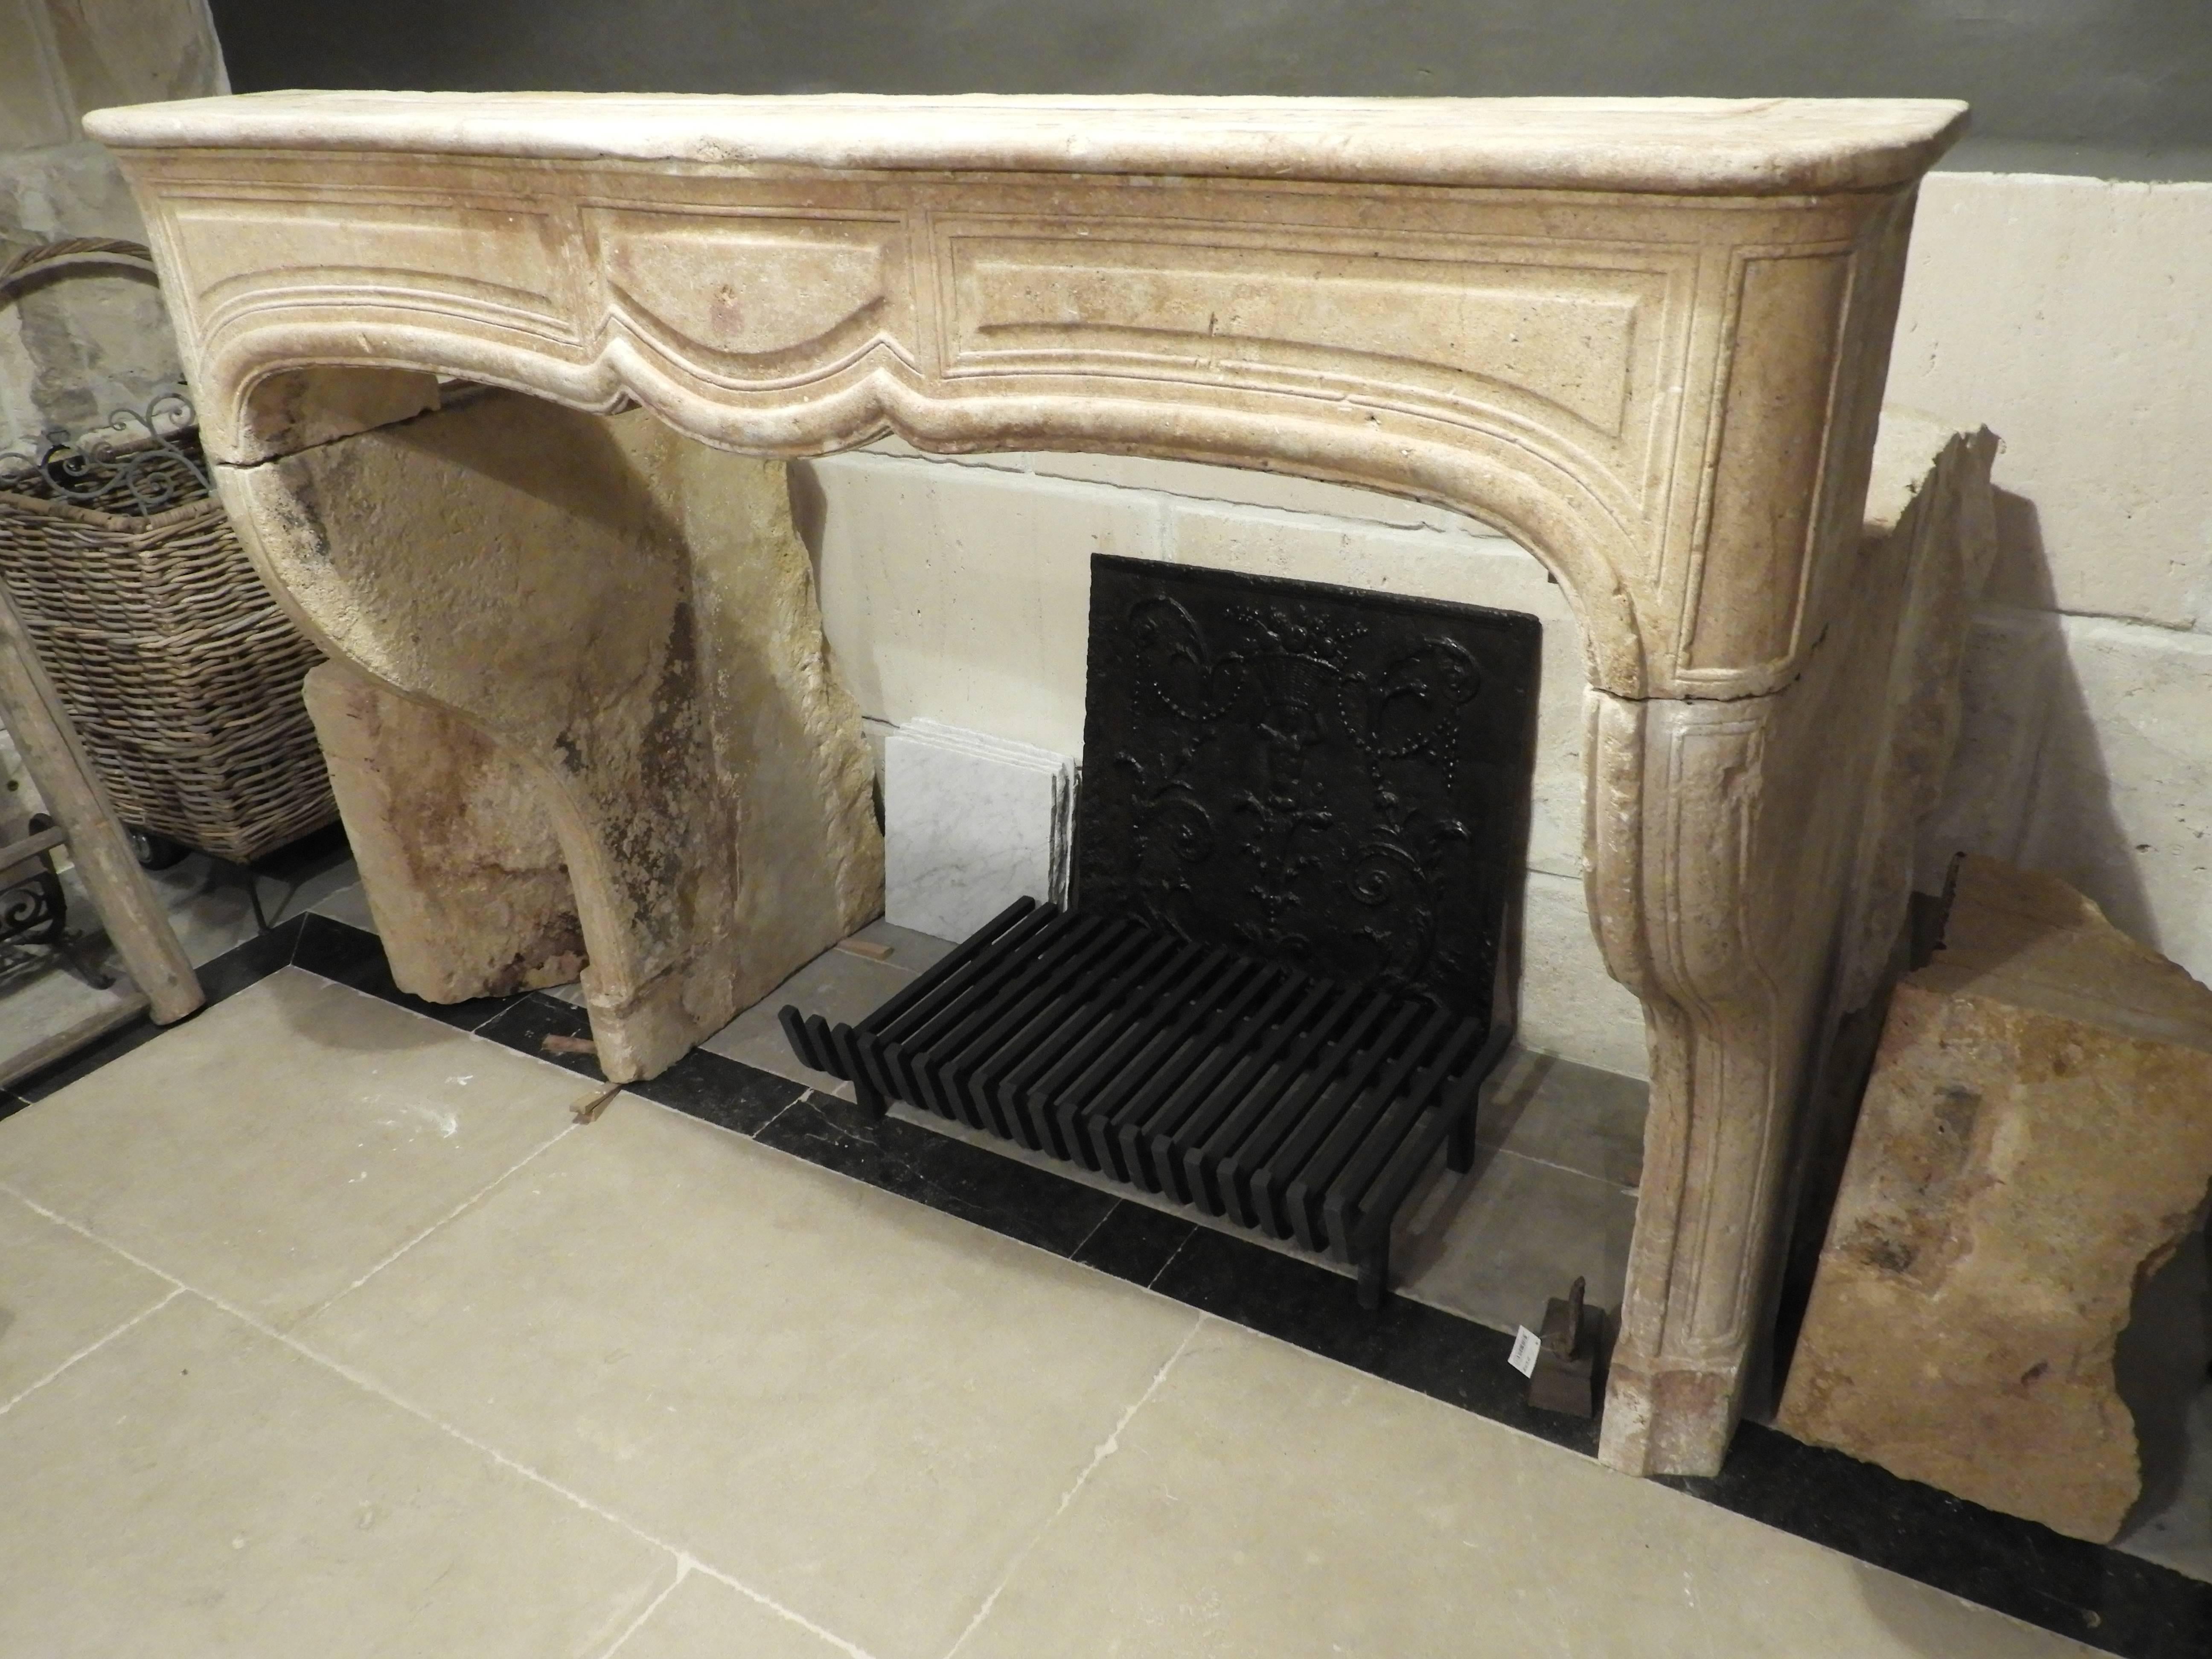 18th century Limestone Louis 15th fireplace in French limestone. The fireplace has a war beige/brow, patine. The fireplace isn't over decorated and has a sober elegant look.
It has character and would fit in to a Classic, country or even modern